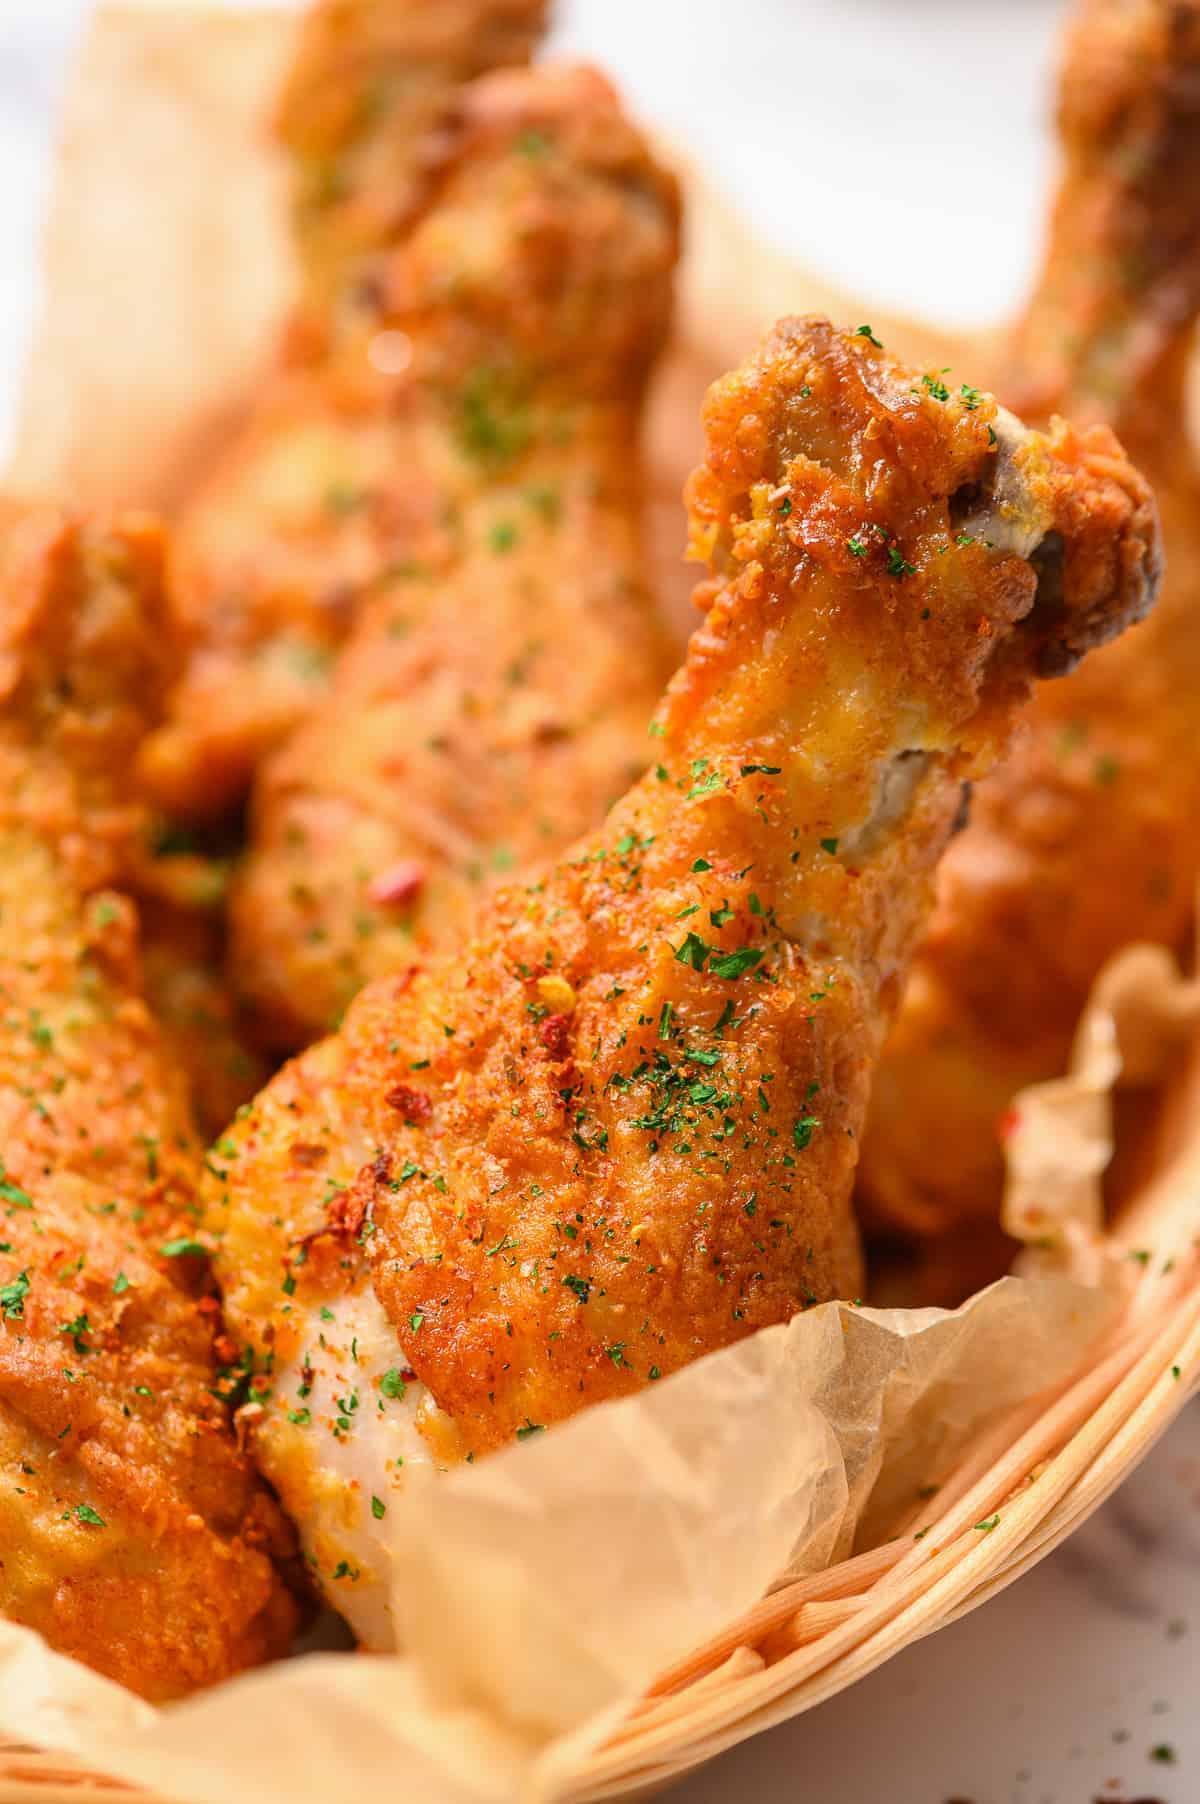 up close picture of baked fried chicken drumsticks